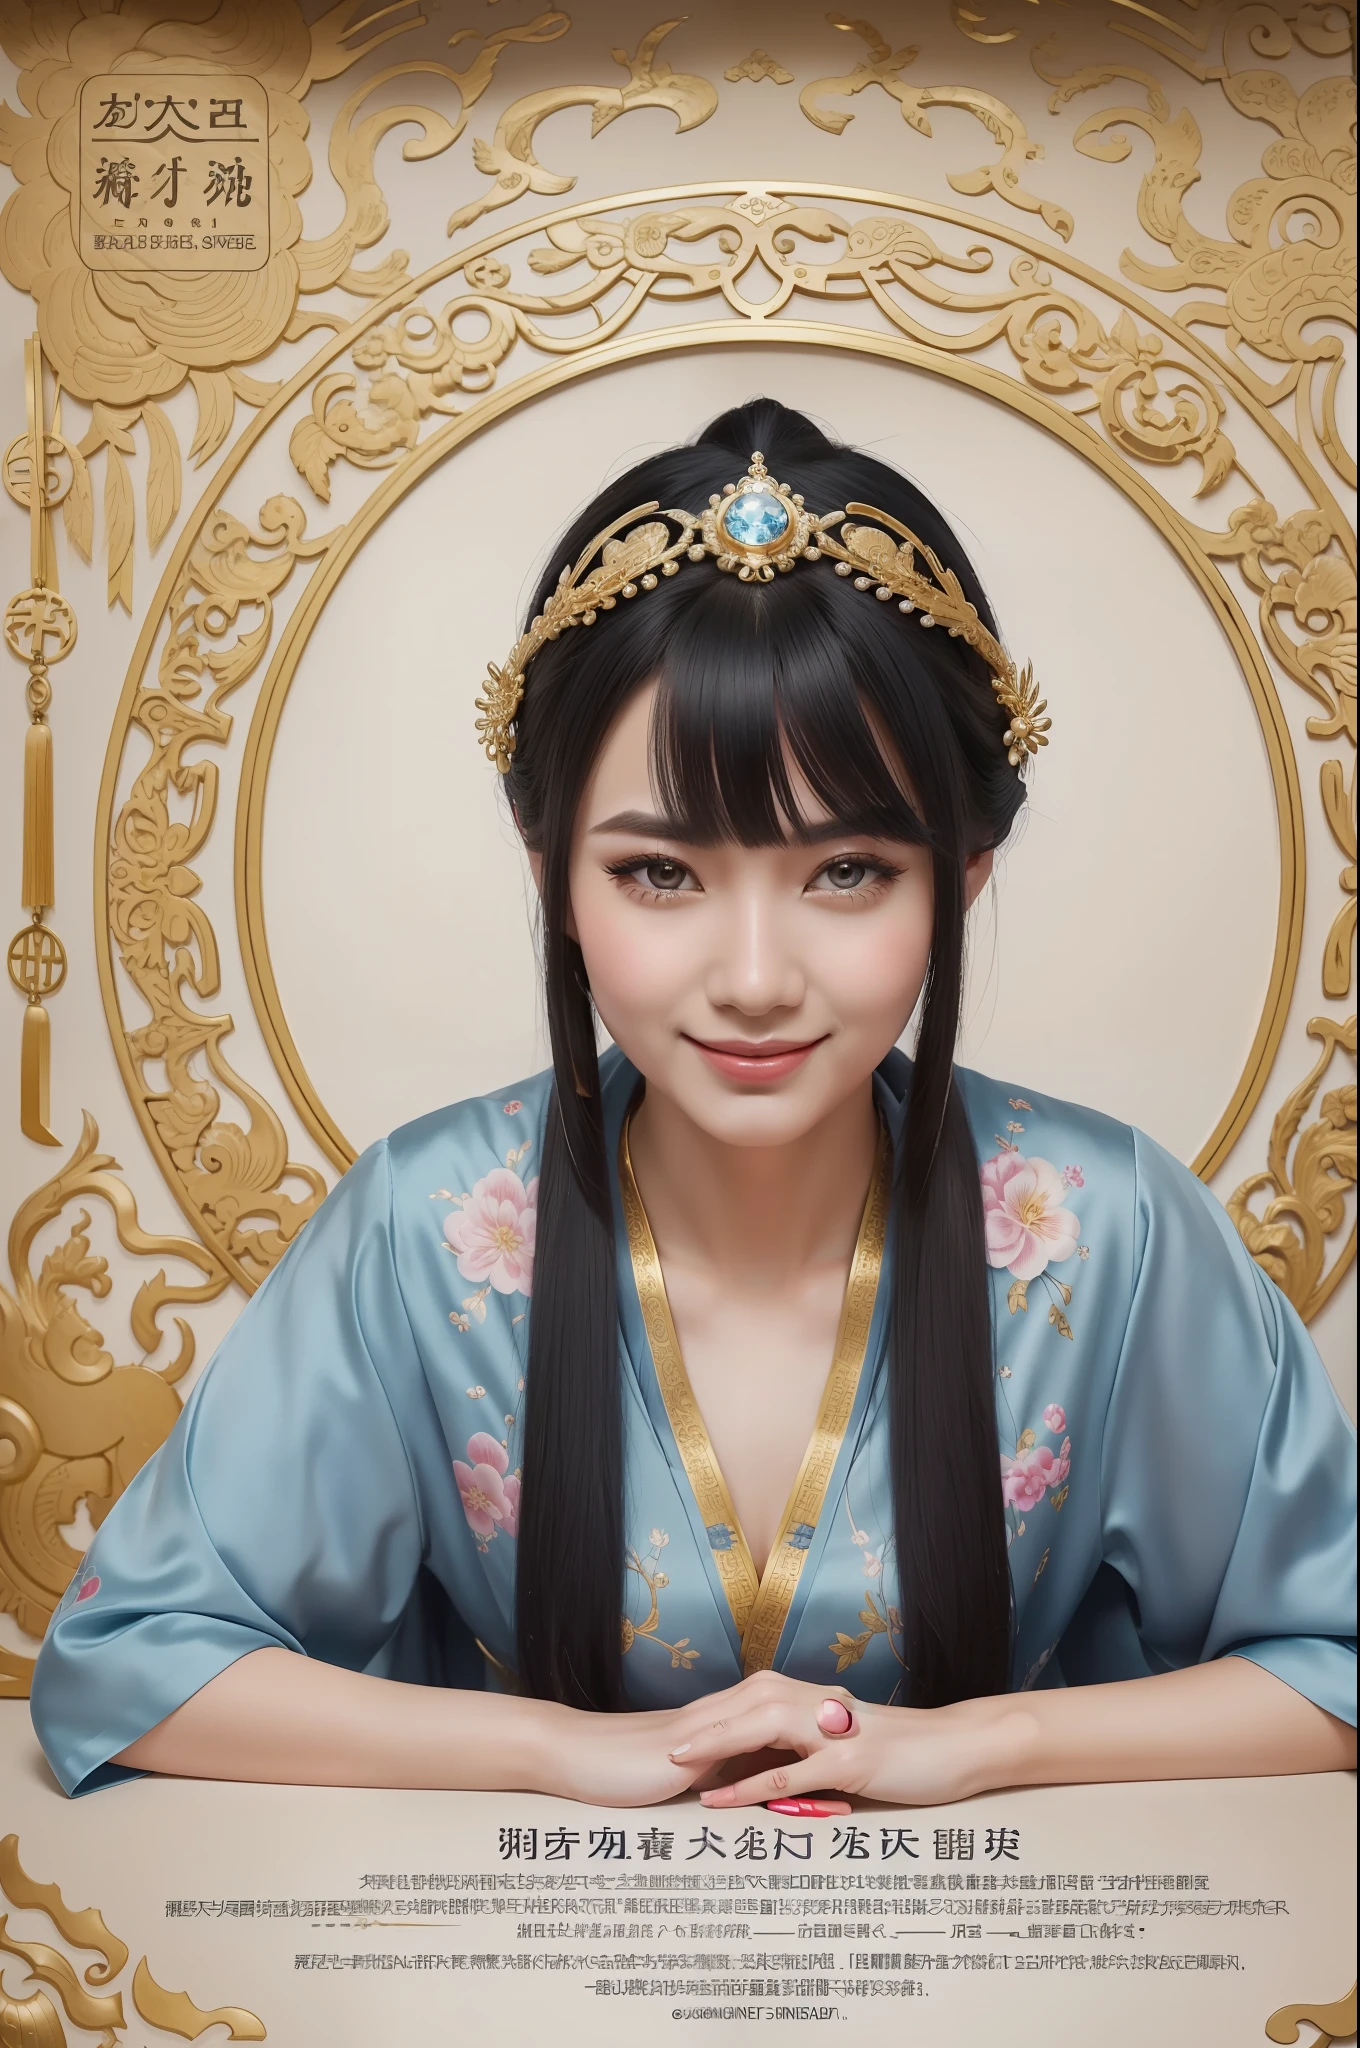 Adult woman, navy blue hair, The ends of gray hair, hairlong, beautiful hairstyle, hair ornament, white eyes, Chinese Clothing, Ornaments, Rings, Heels, Ancient Chinese themes, looking a viewer, Happy smile, overhead view, Lies on the money, gold coins, A mountain of money, Fantasy art, Beautiful painting of characters, Works of art in the style of Guvaika, epic exquisite character art, stunning character art, Beautiful rich Woman, perspective, really happy, closed eye, overhead view(reference sheet:1.5)